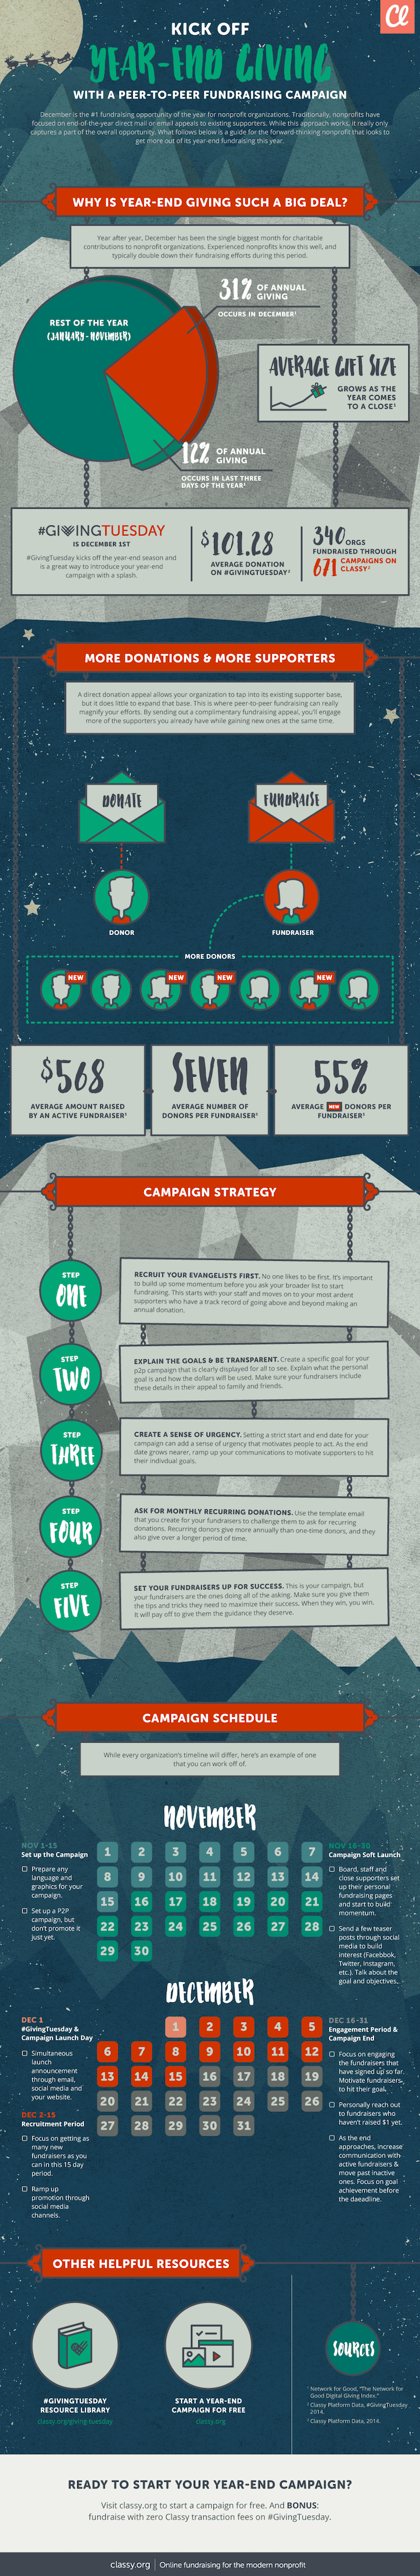 year-end campaign infographic